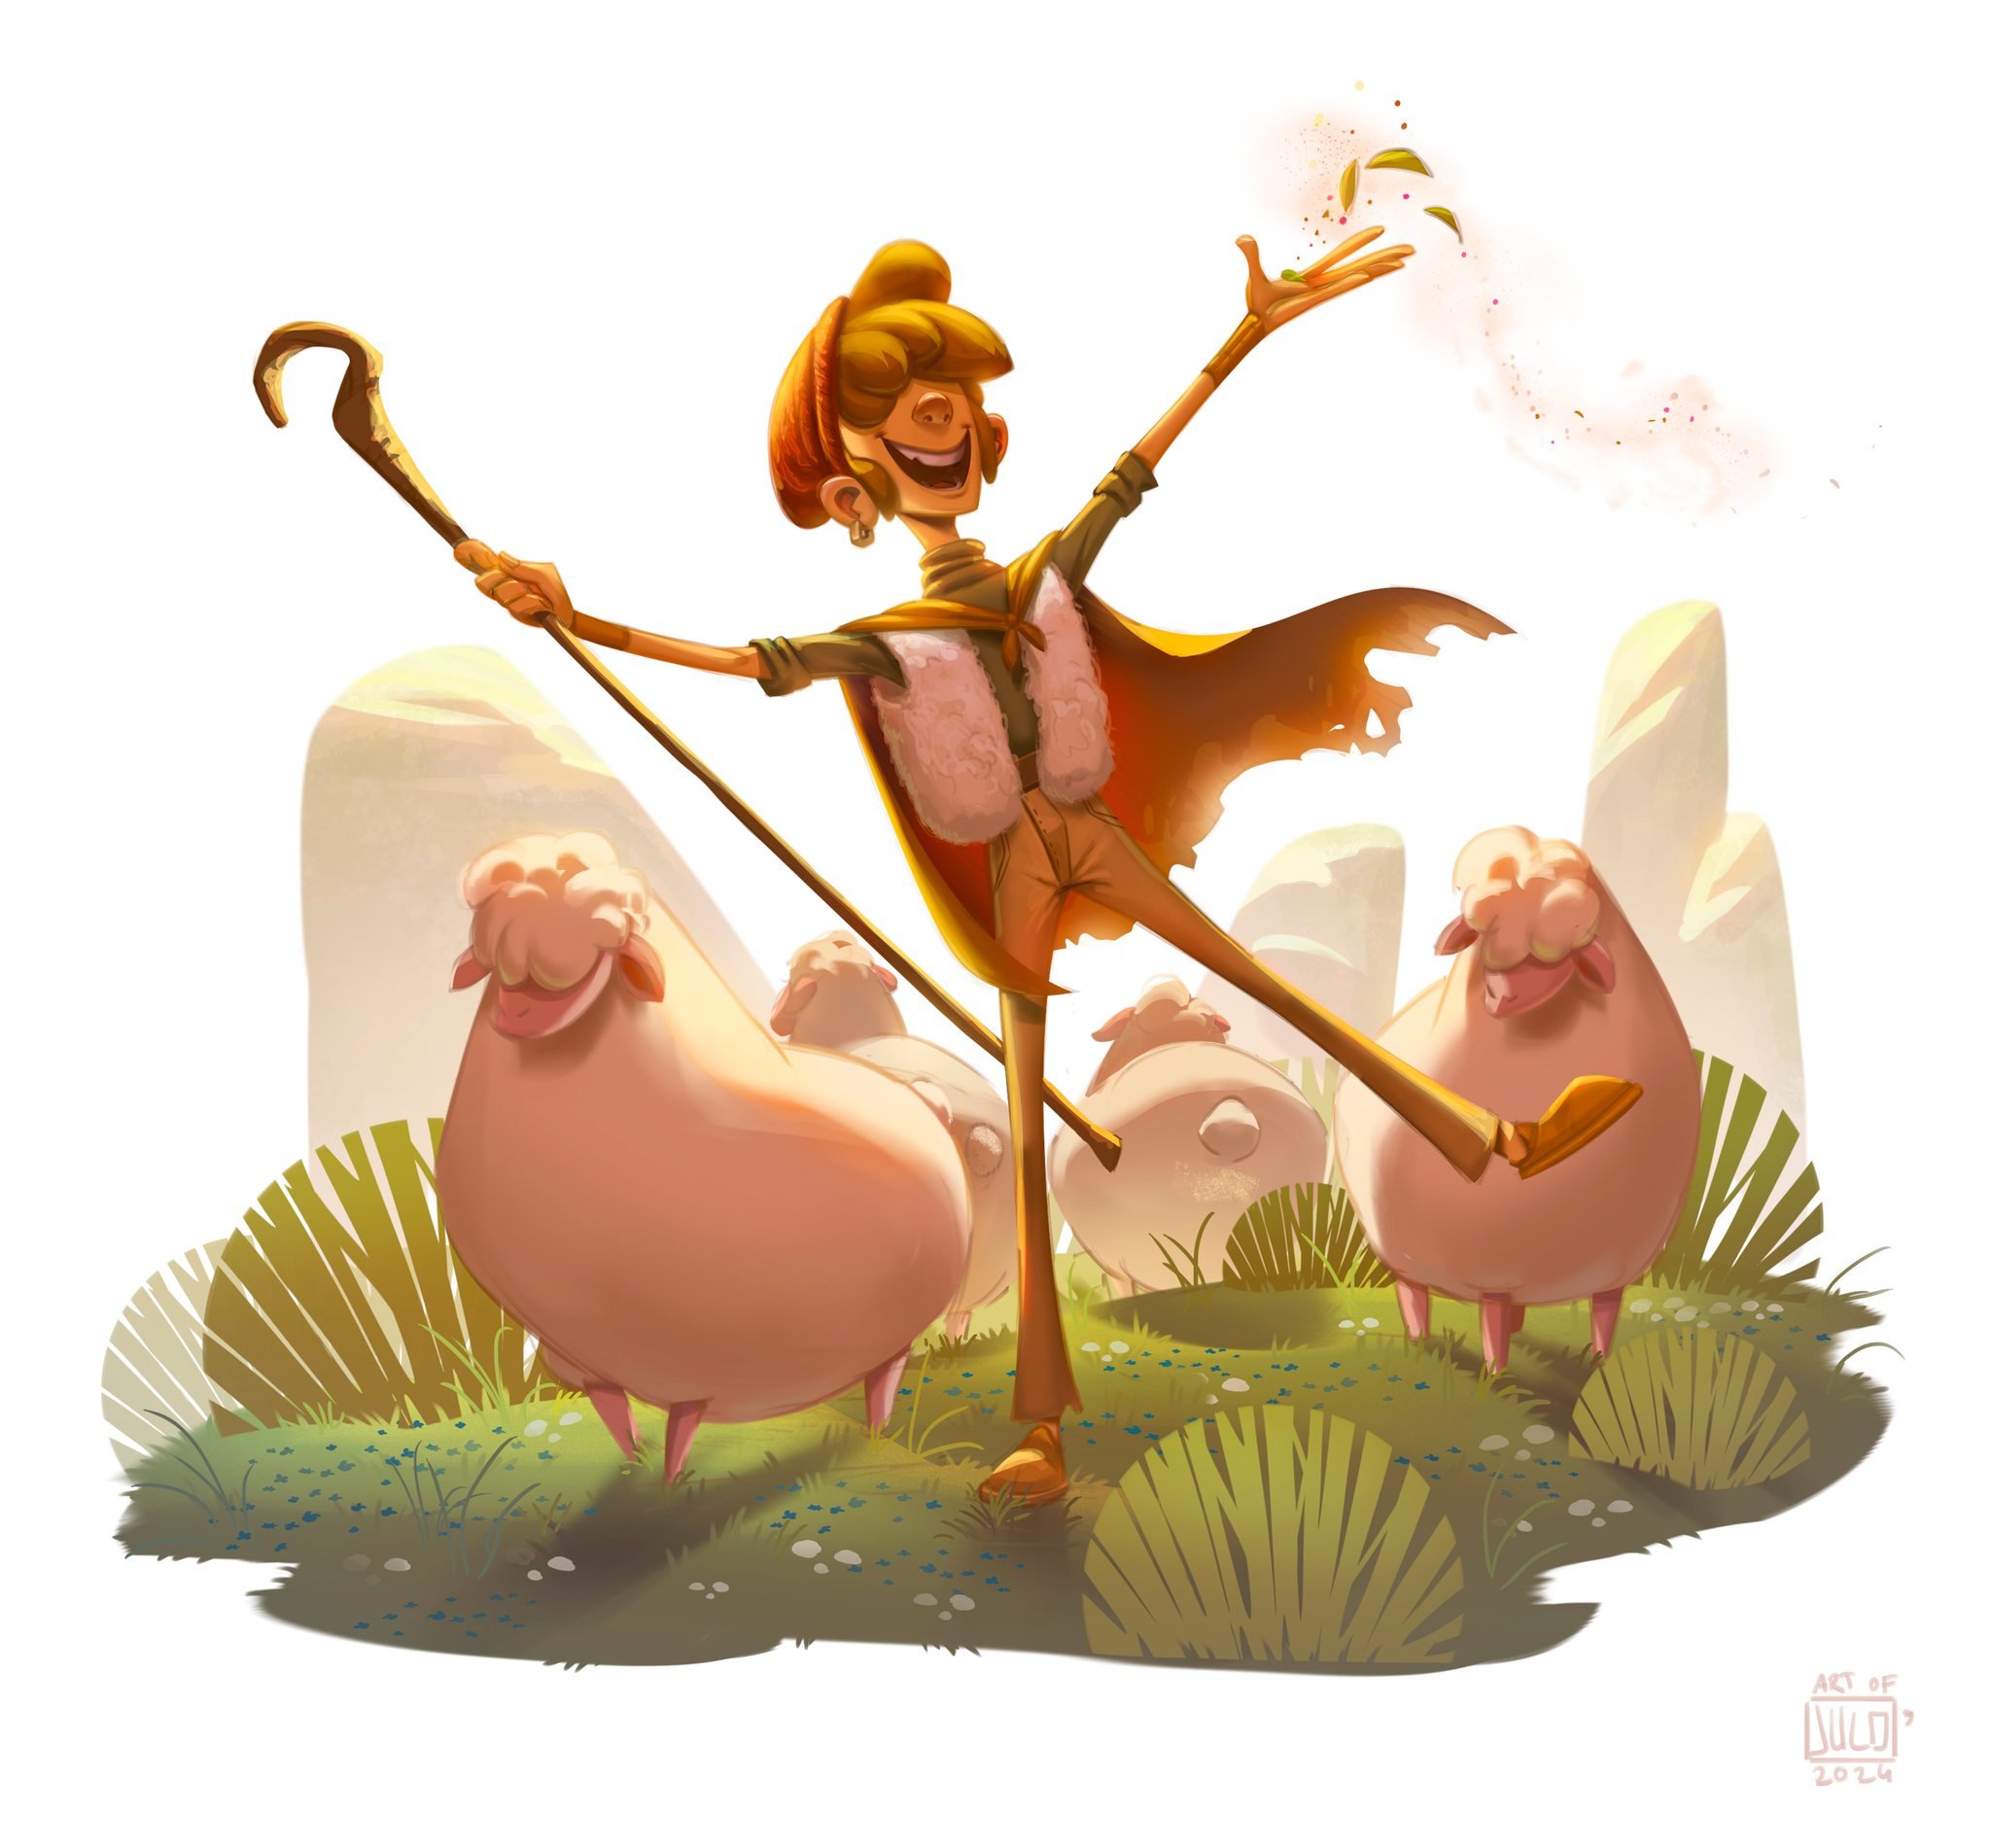 Submission by Jules Dubost* ( @artofjulo ) for the #CDChallenge - the theme for April 2024 was #TravelingShepherd⠀⠀⠀⠀⠀⁣⠀⁣⠀⠀⠀⁠⠀⁠⠀⁠⠀⁠⠀⁠⠀⁠⠀⁠⠀⁠⠀
.⠀⠀⠀⠀⠀⠀⁣⠀⁣⠀⠀⠀⁠⠀⁠⠀⁠⠀⁠⠀⁠⠀⁠⠀⁠⠀⁠⠀
.⠀⠀⠀⠀⠀⠀⁣⠀⁣⠀⠀⠀⁠⠀⁠⠀⁠⠀⁠⠀⁠⠀⁠⠀⁠⠀⁠⠀
.⠀⠀⠀⠀⠀⠀⁣⠀⁣⠀⠀⠀⁠⠀⁠⠀⁠⠀⁠⠀⁠⠀⁠⠀⁠⠀⁠⠀
Presented by #Chara